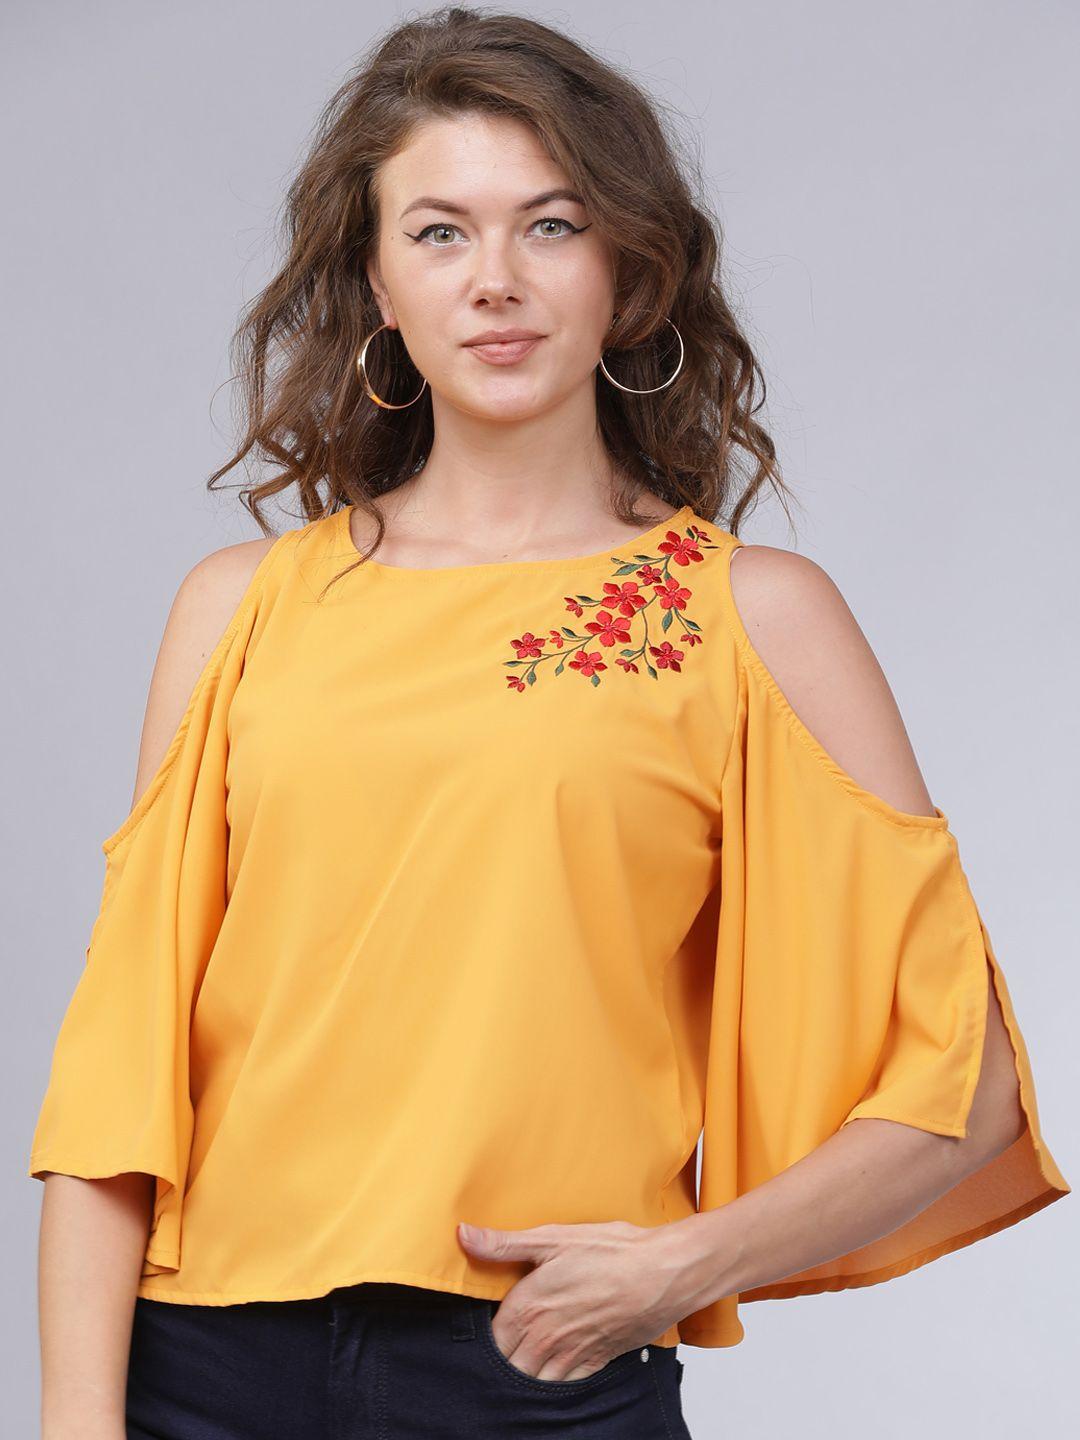 mumbai slang chic women mustard yellow & red floral embroidered top